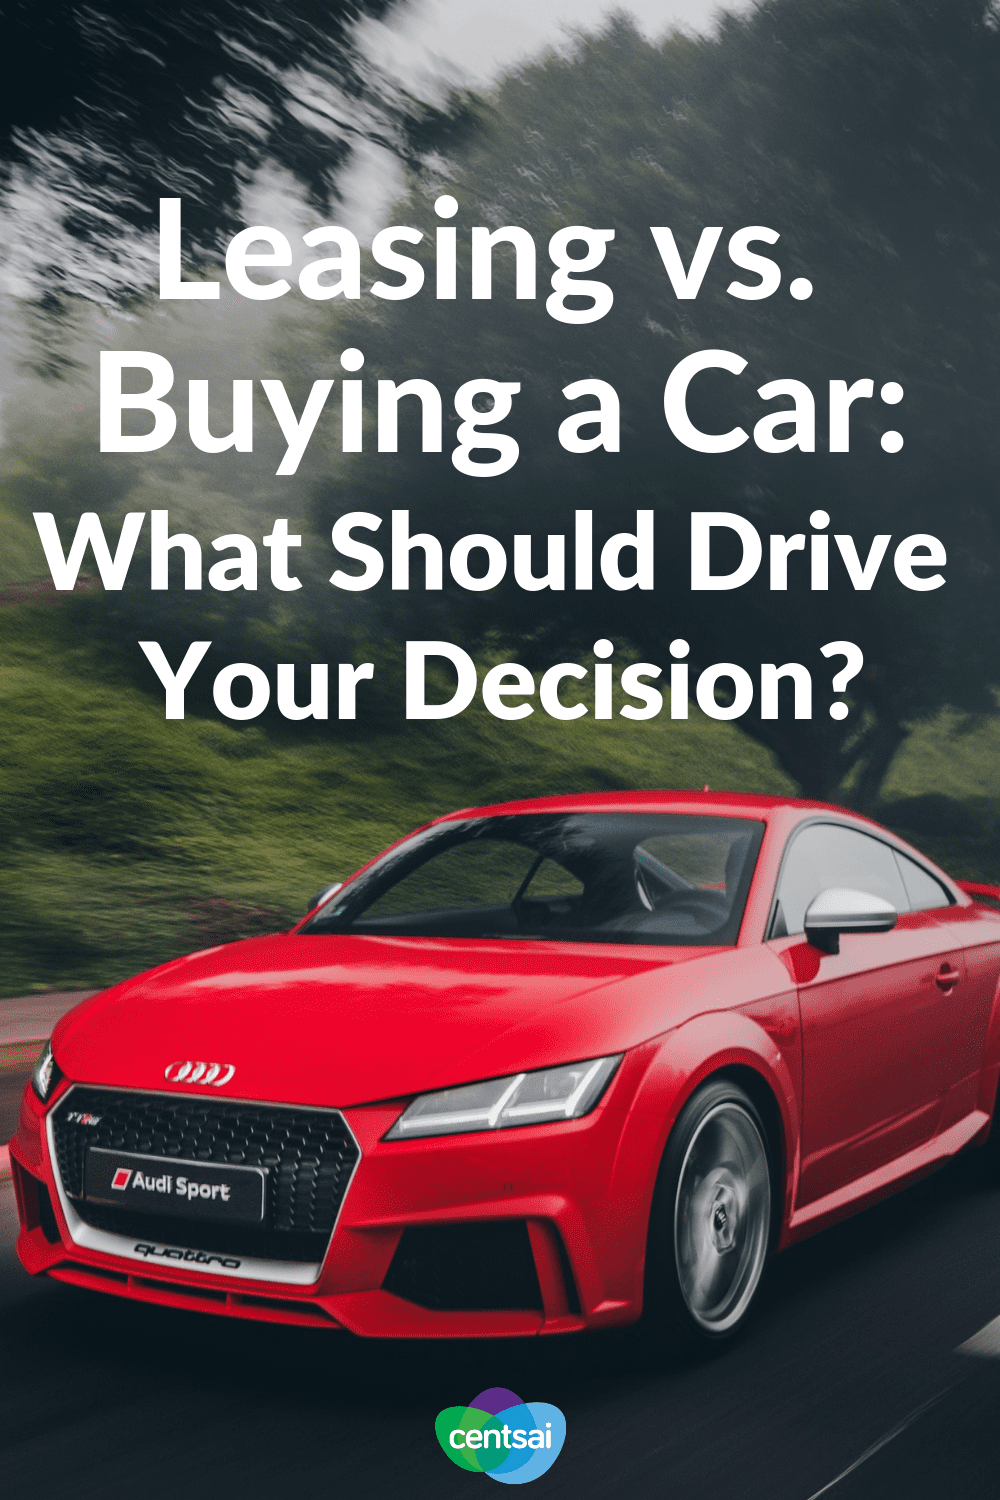 Leasing vs. Buying a Car: What Should Drive Your Decision? Should you really buy a new vehicle? Might it be smarter to temporarily lease it? Check out our comparison of leasing vs. buying a car. #Leasecar #frugaltips #frugallifehacks #buycar